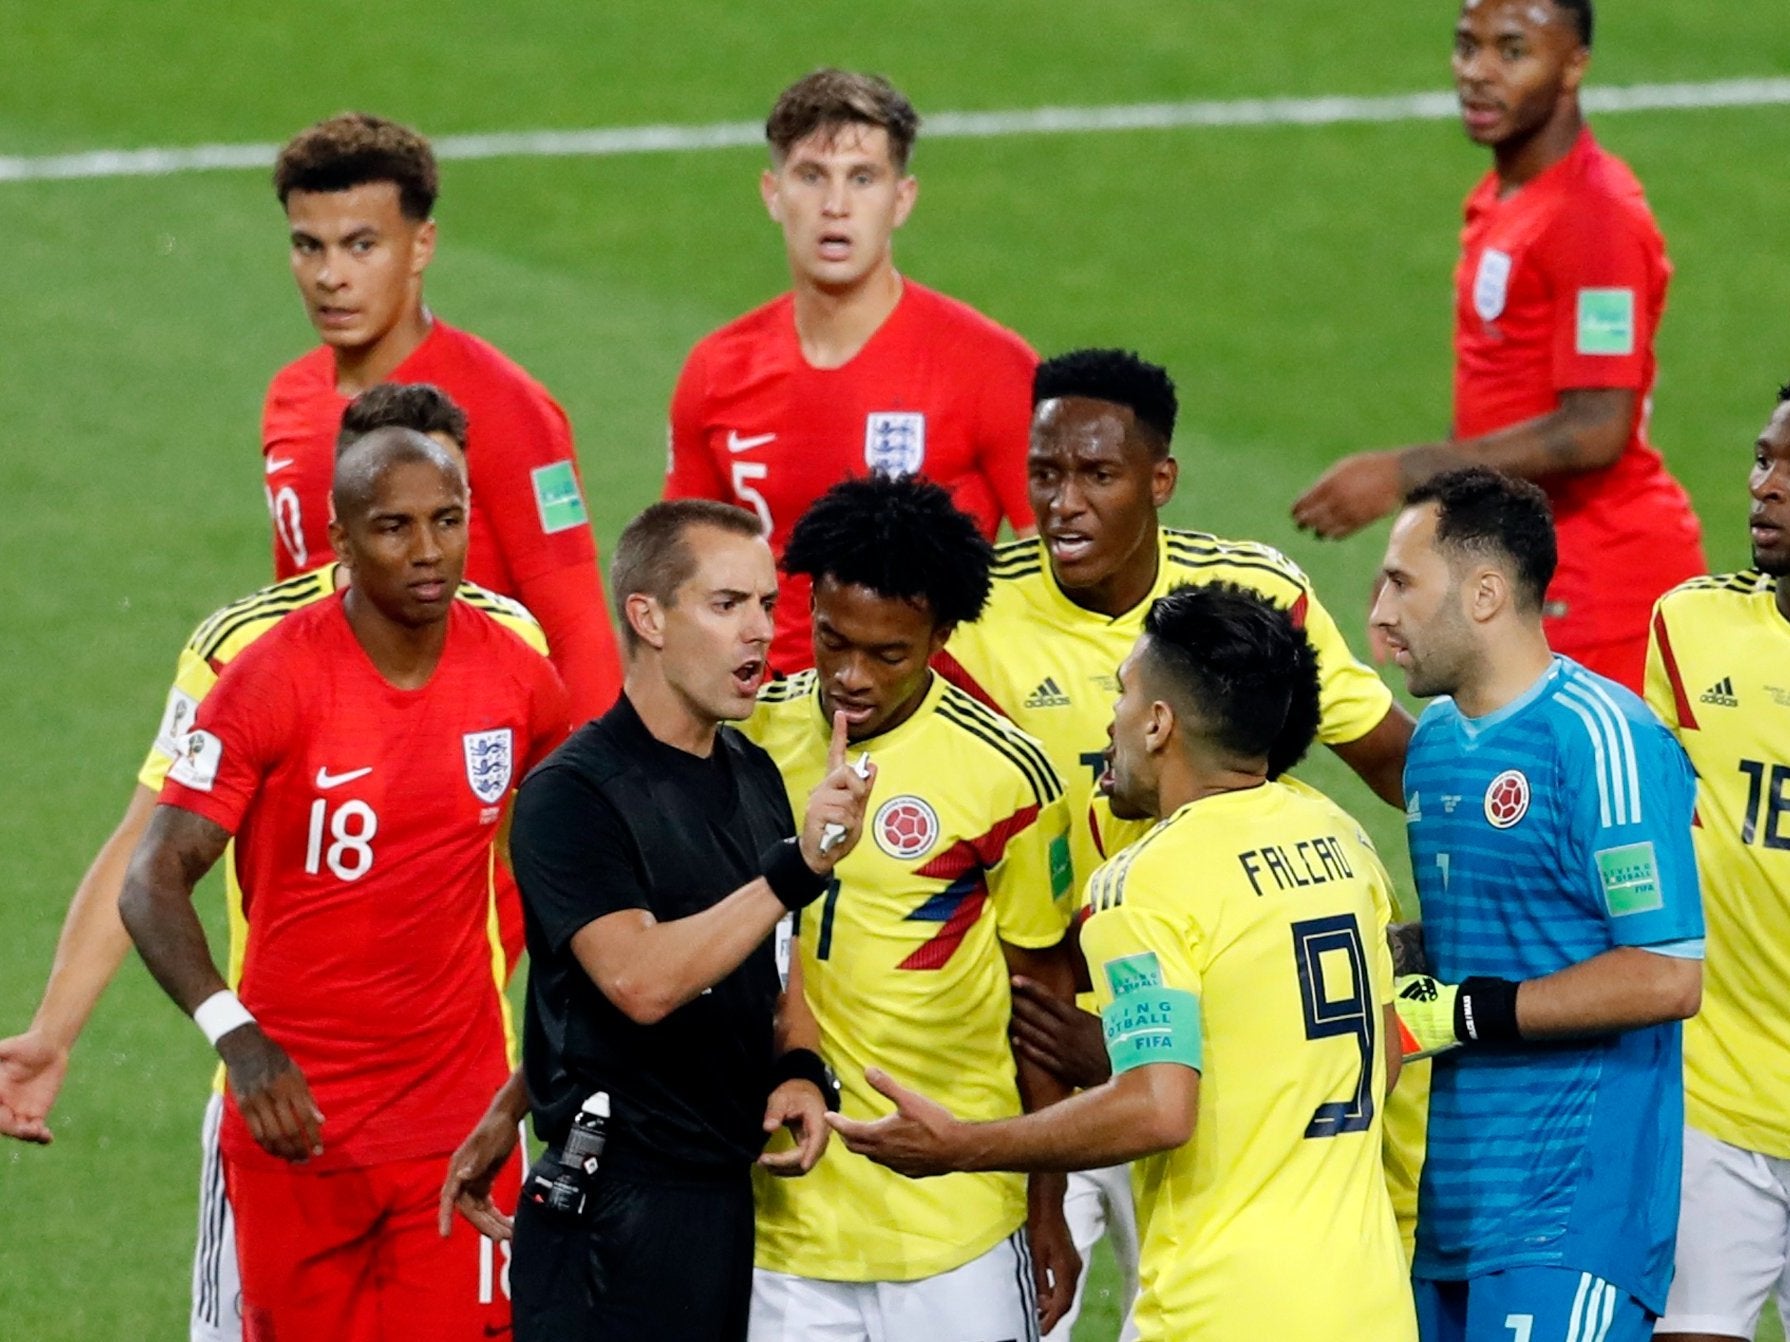 Radamel Falcao confronts Mark Geiger during Colombia's game against England